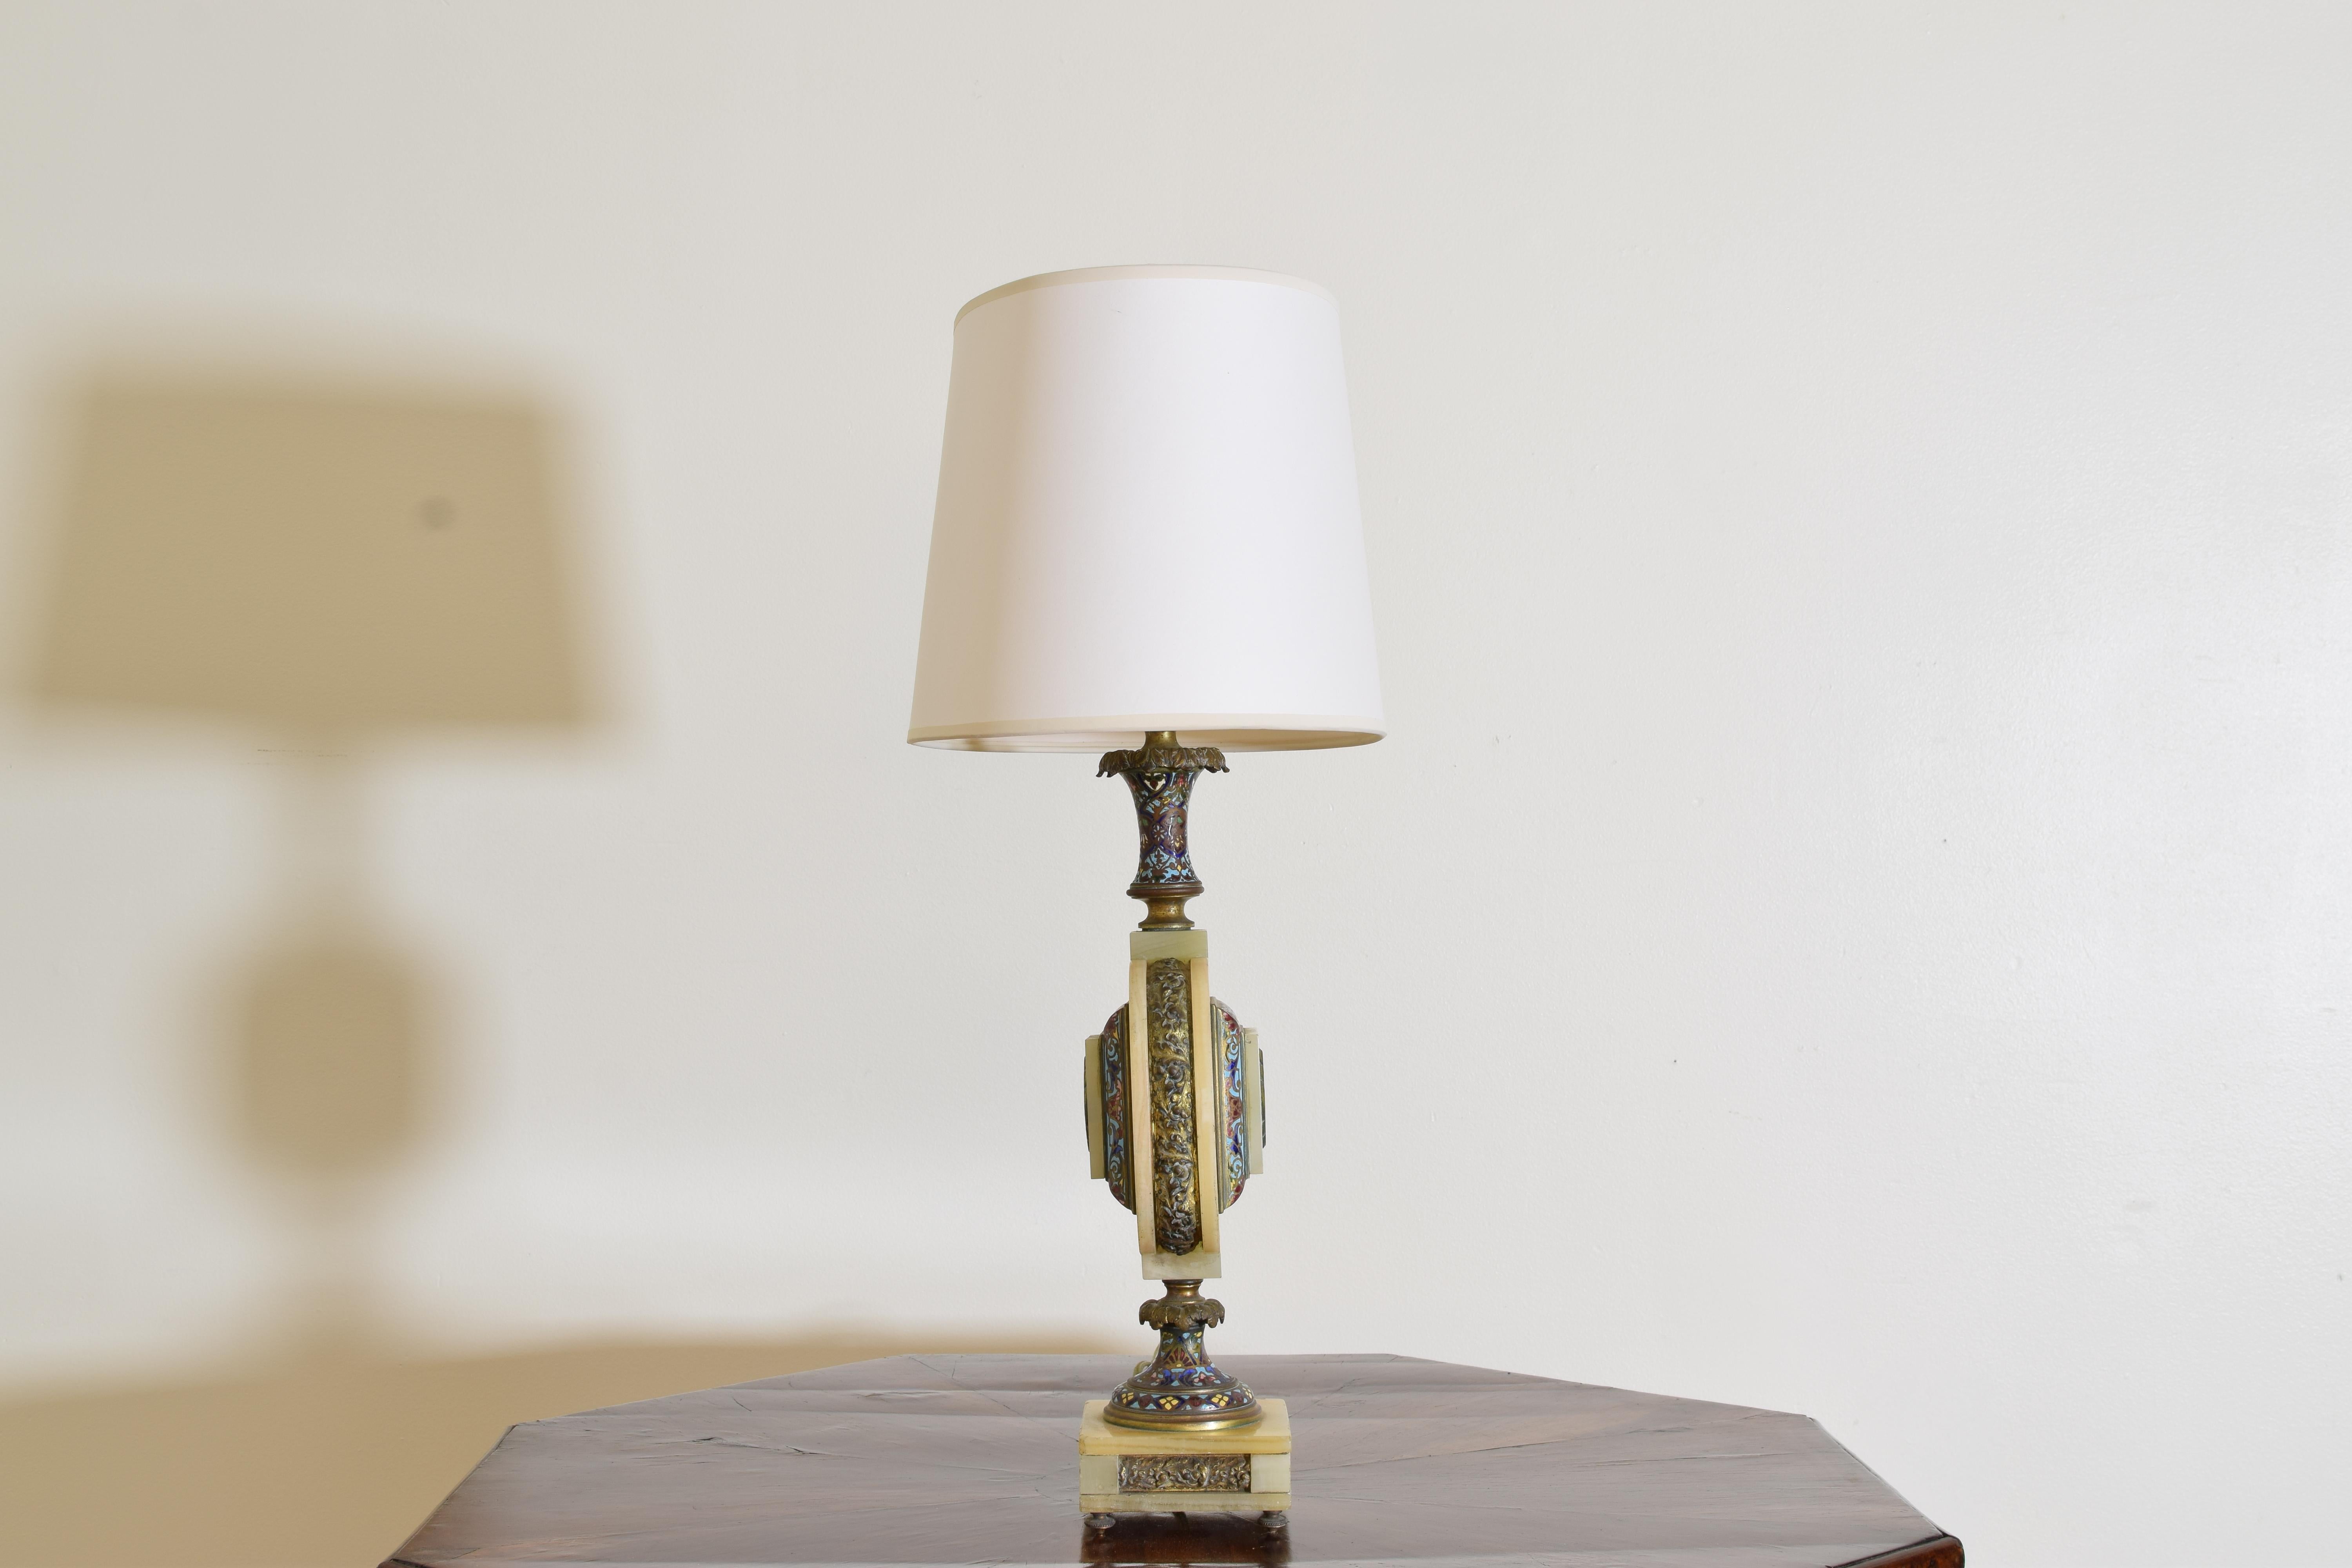 Early 20th Century Japanese Onyx and Cloisonné Enamel Table Lamp, 1st Quarter 20th Century For Sale